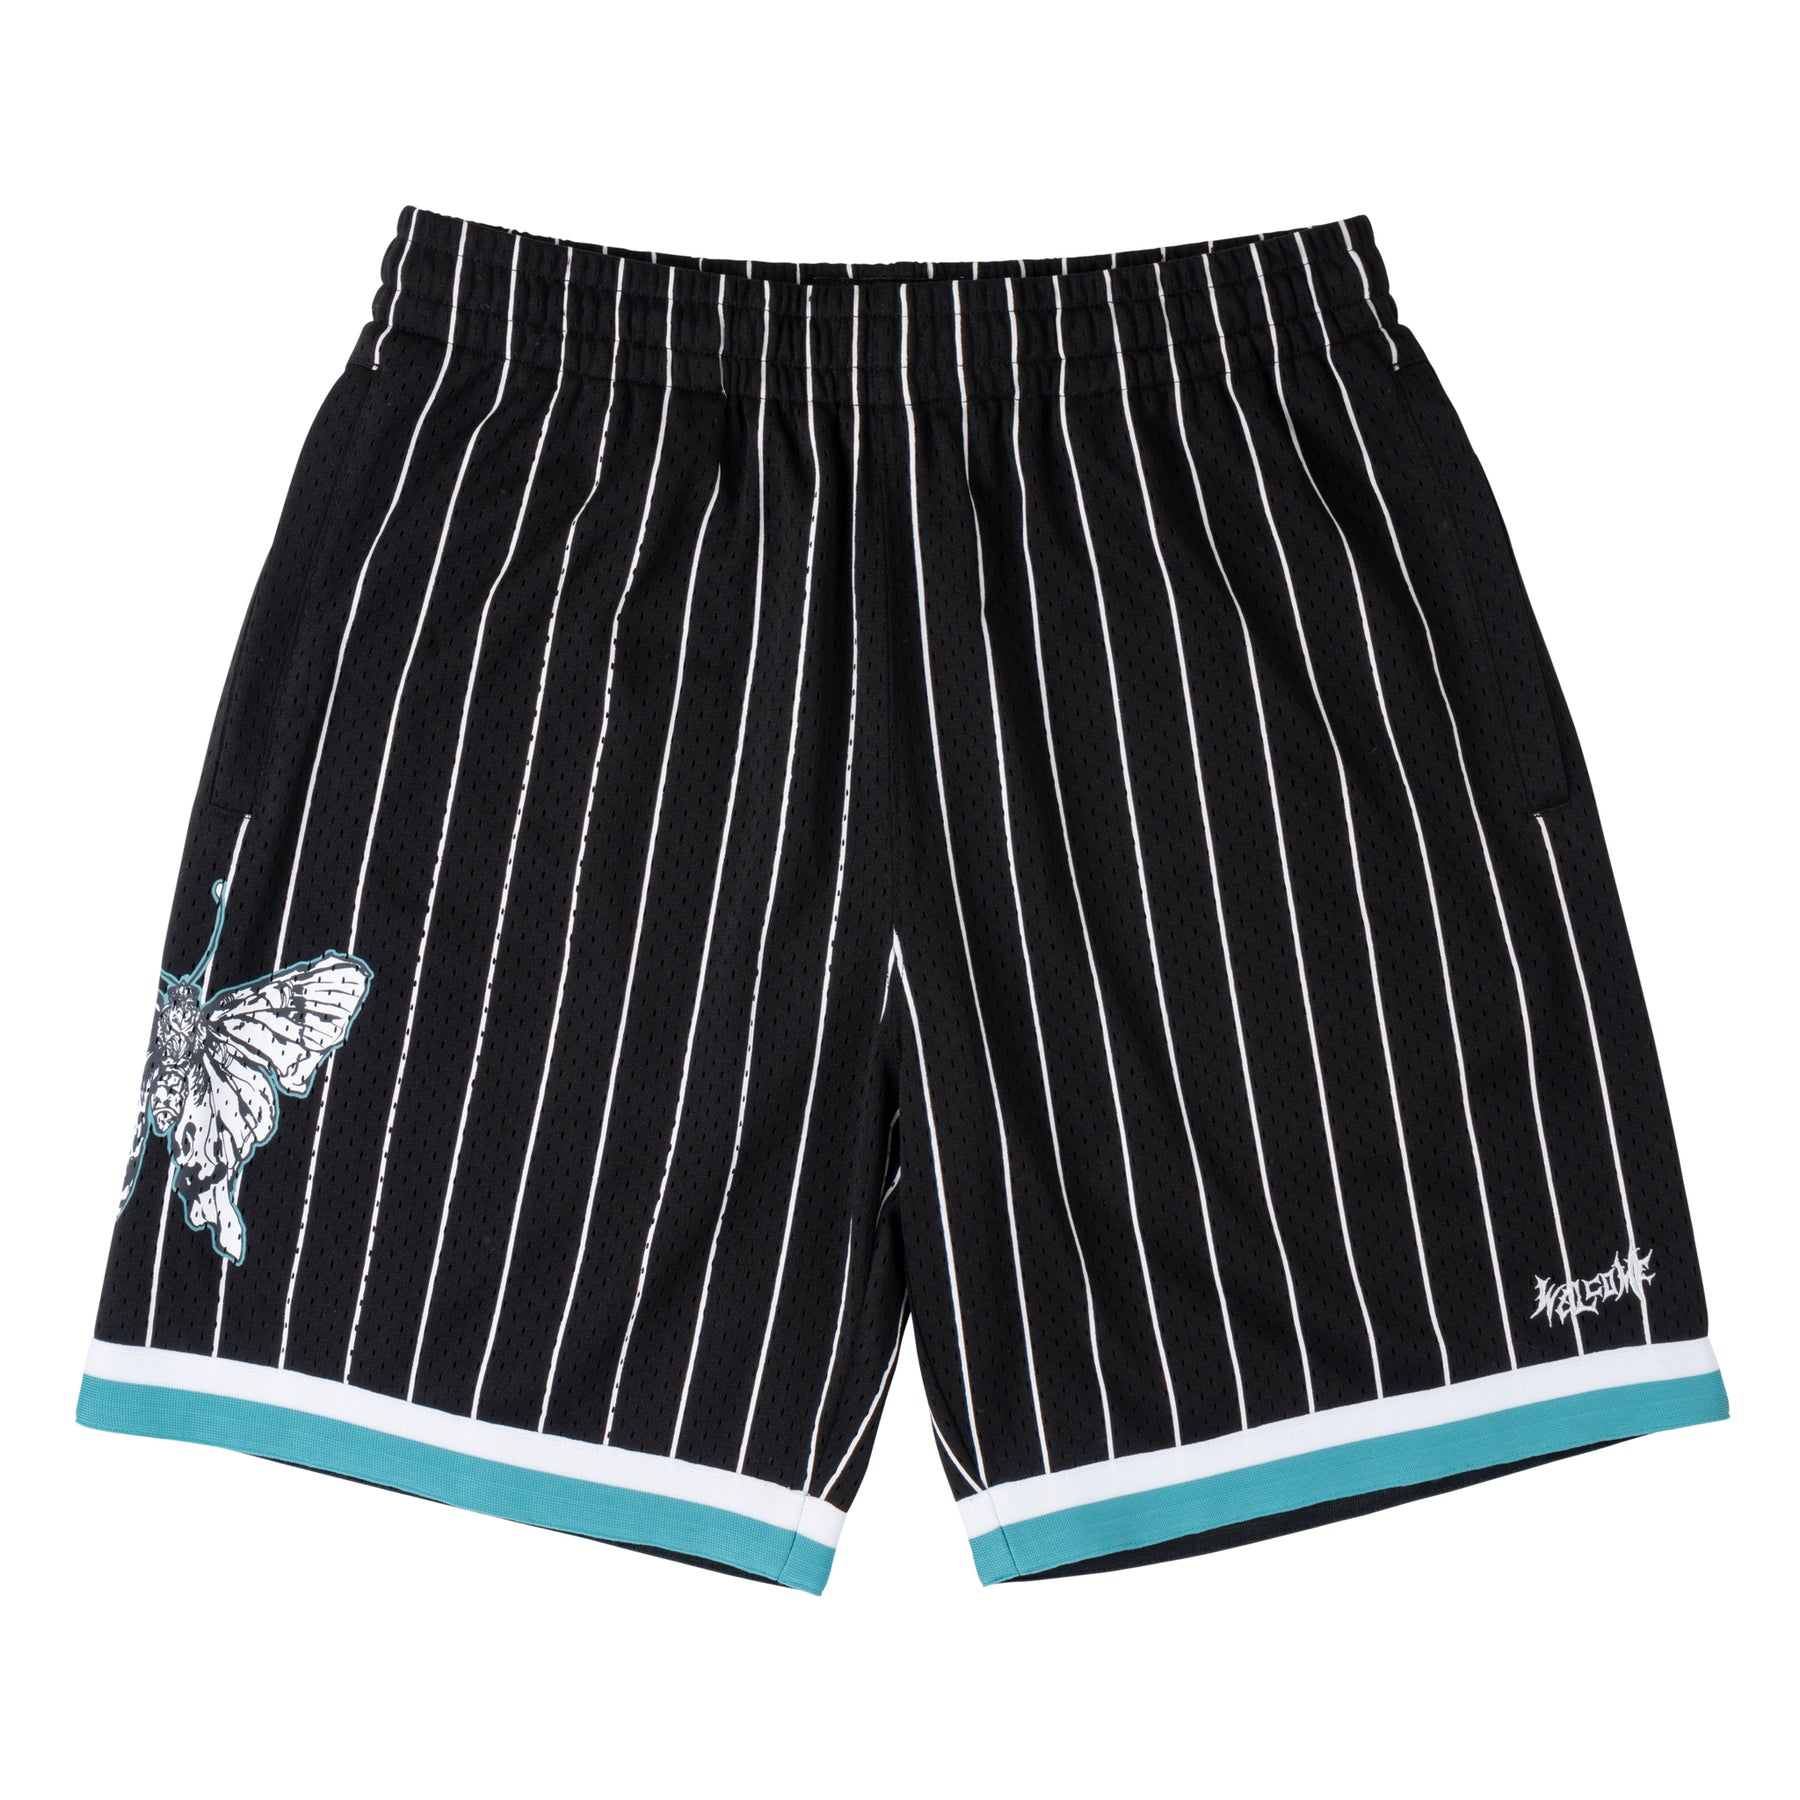 Butterfly Mesh Basketball Shorts - Black/Teal – Welcome Skateboards